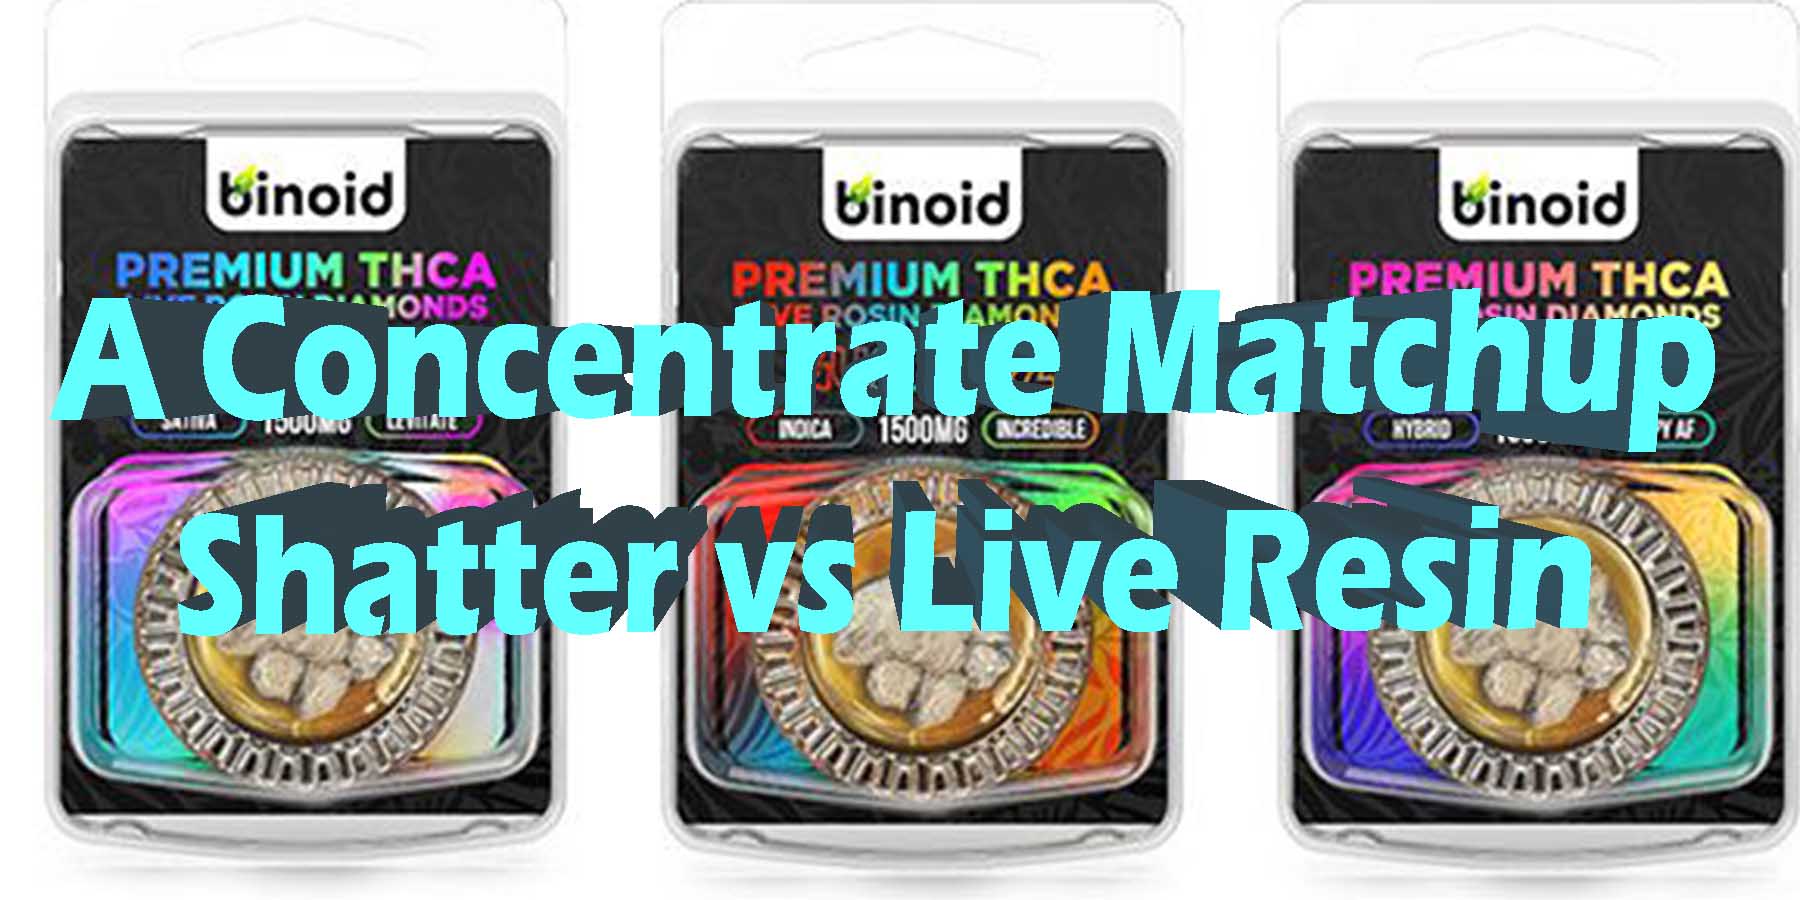 A Concentrate Matchup Shatter vs Live Resin HowToGetNearMe BestPlace LowestPrice Coupon Discount For Smoking Best High Smoke Shop Online Near Me Strongest Binoid.